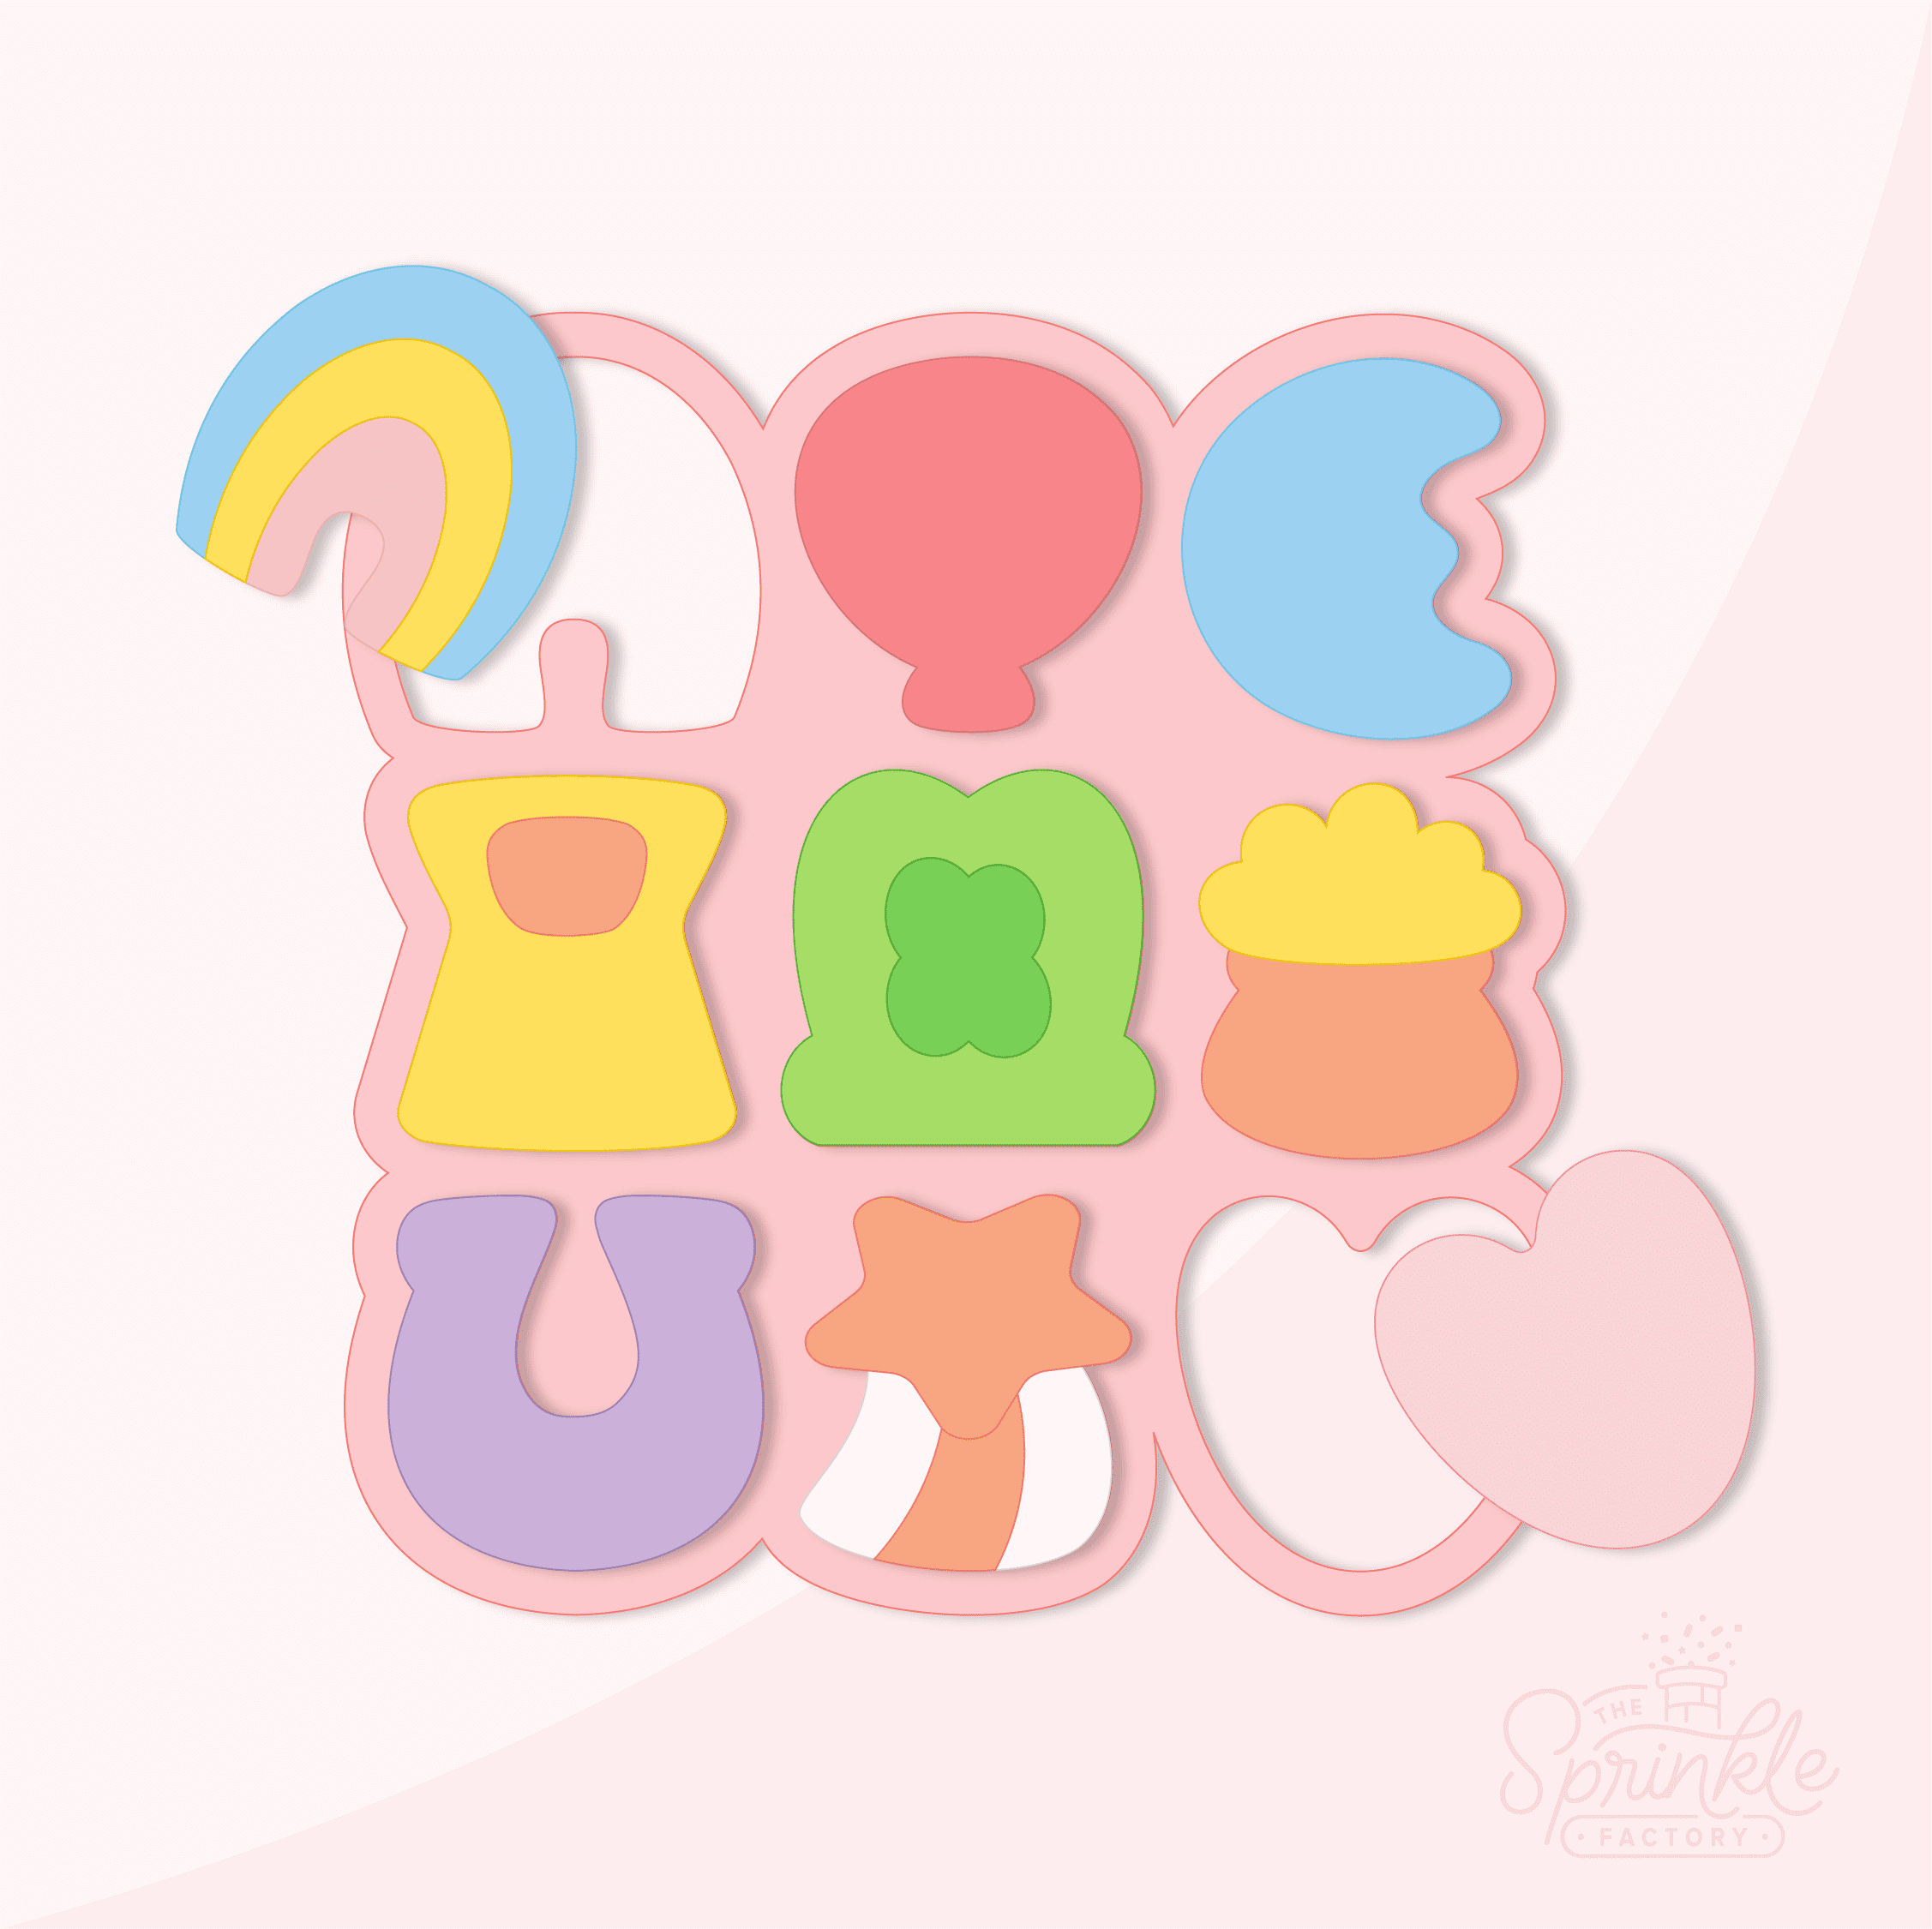 Clipart of 9 marshmallow cereal charms: blue/yellow/prink rainbow, red balloon, orange/yellow pot of gold, yellow/orange hour glass, green hat with shamrock, pink heart, purple horseshoe, white/orange shooting star and a blue moon all on top of a pink multi cutter.